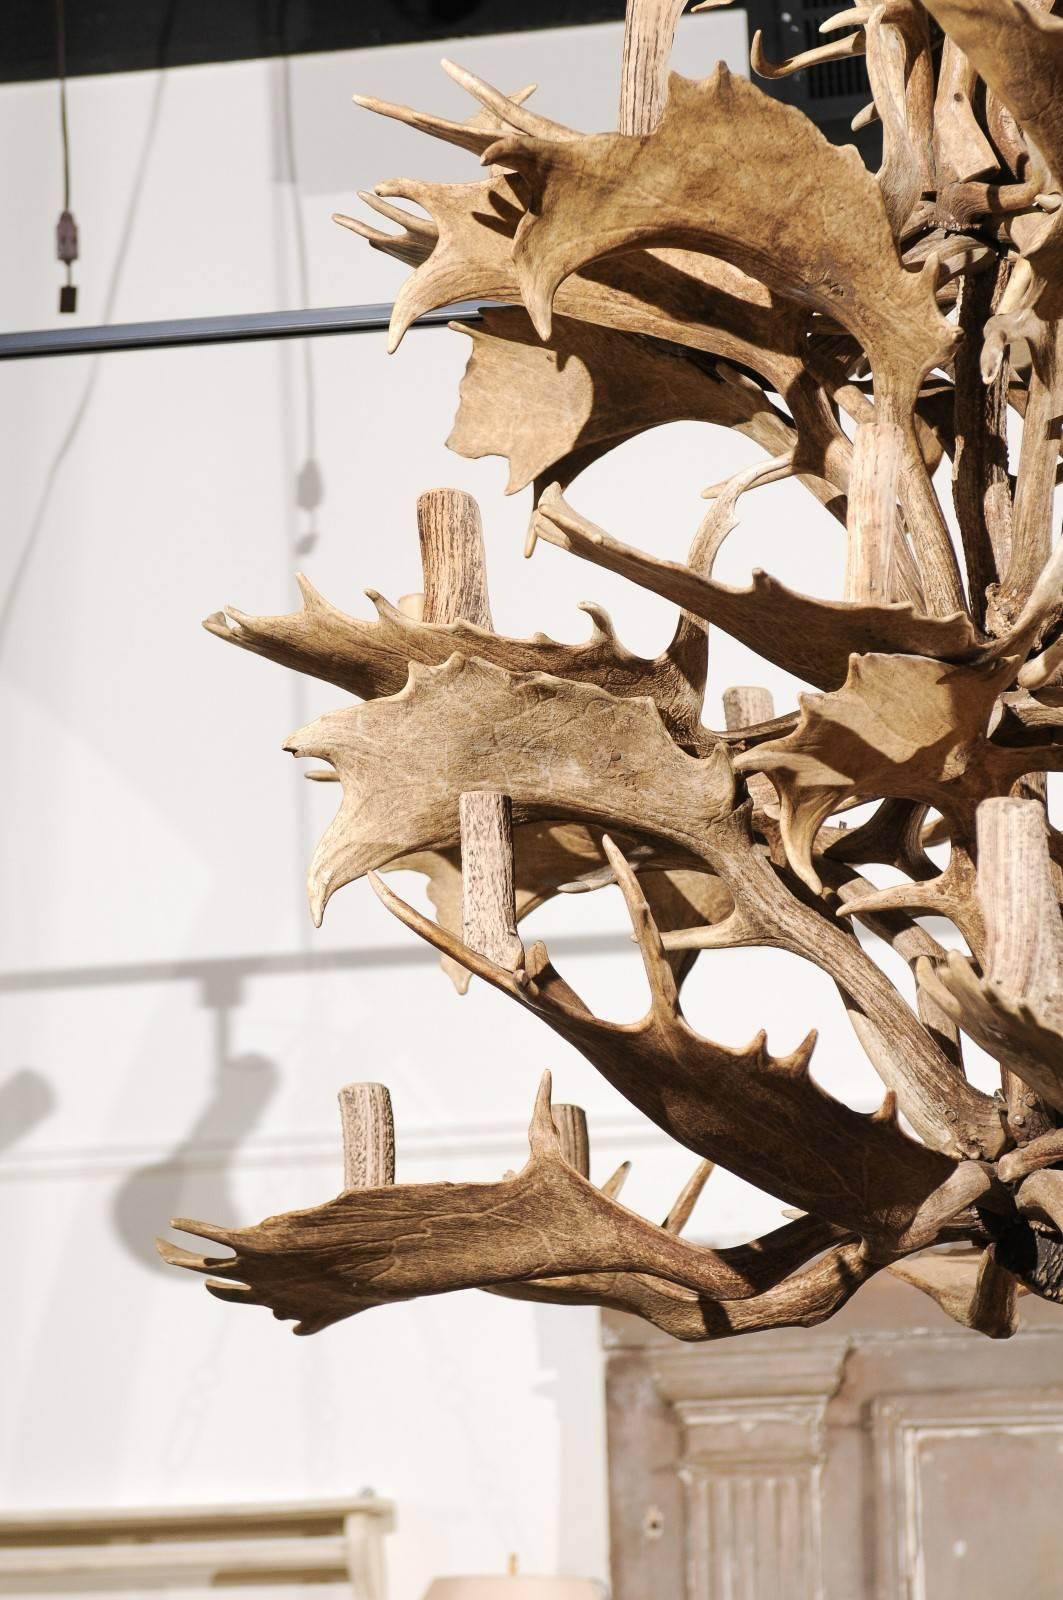 European Naturally Shed 24-Light Antler Chandelier from the 1940s, Rewired for the US